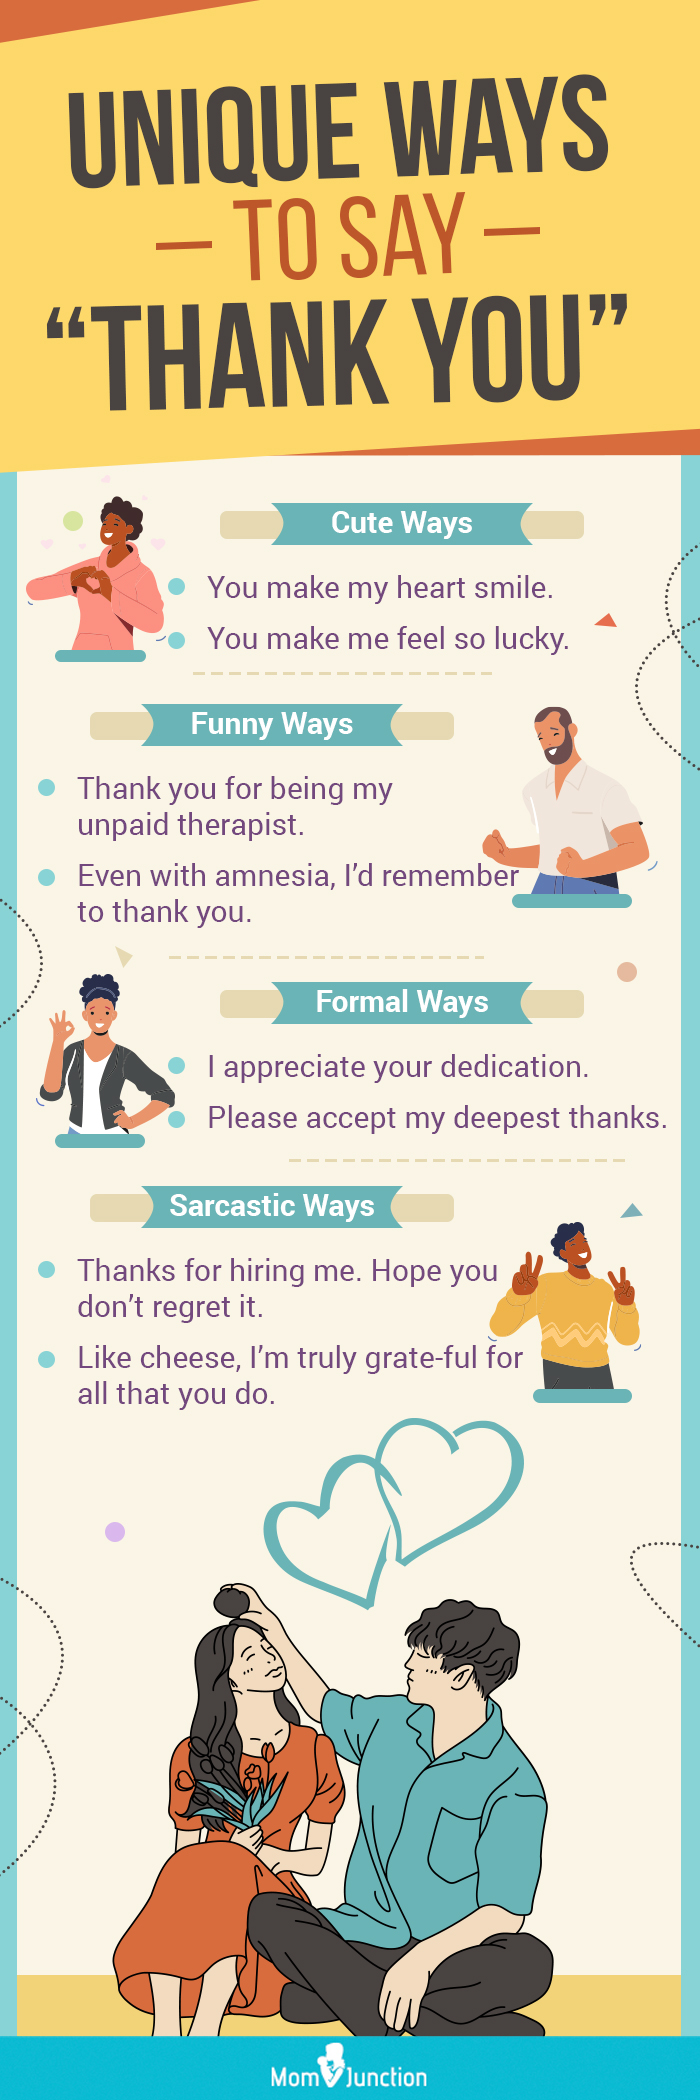 11 Unique Ways to Say 'Thank You' in an Email